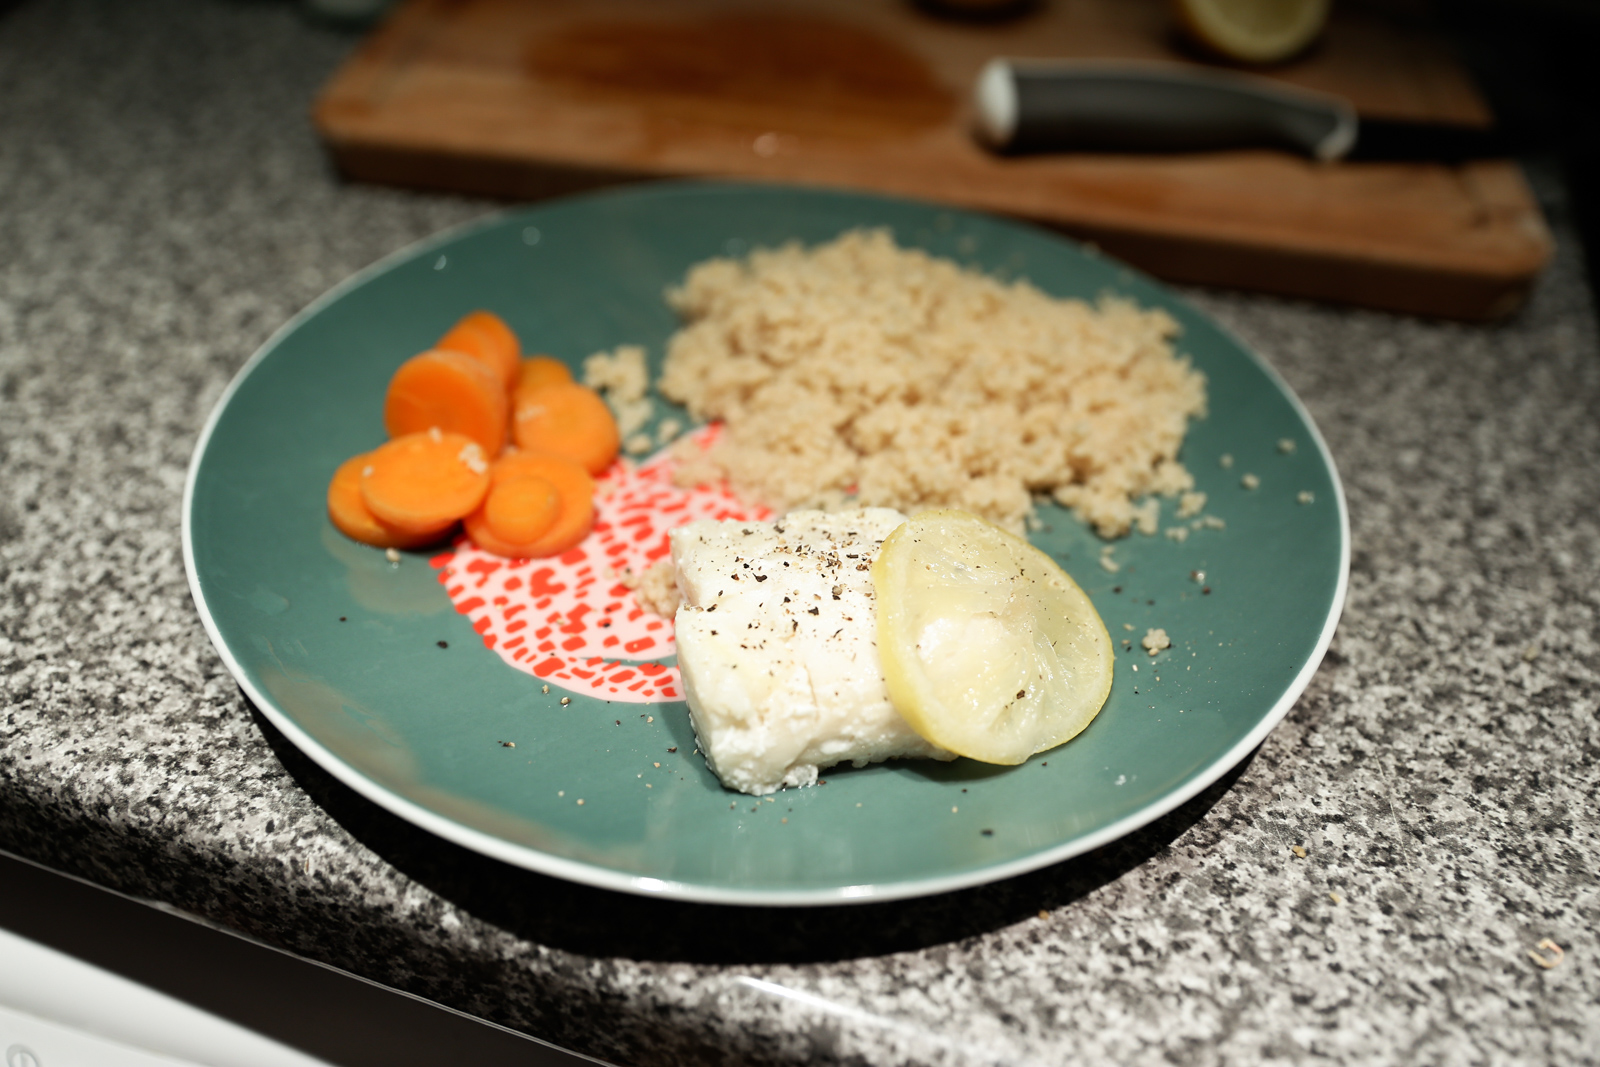 Cod and carrots dinner